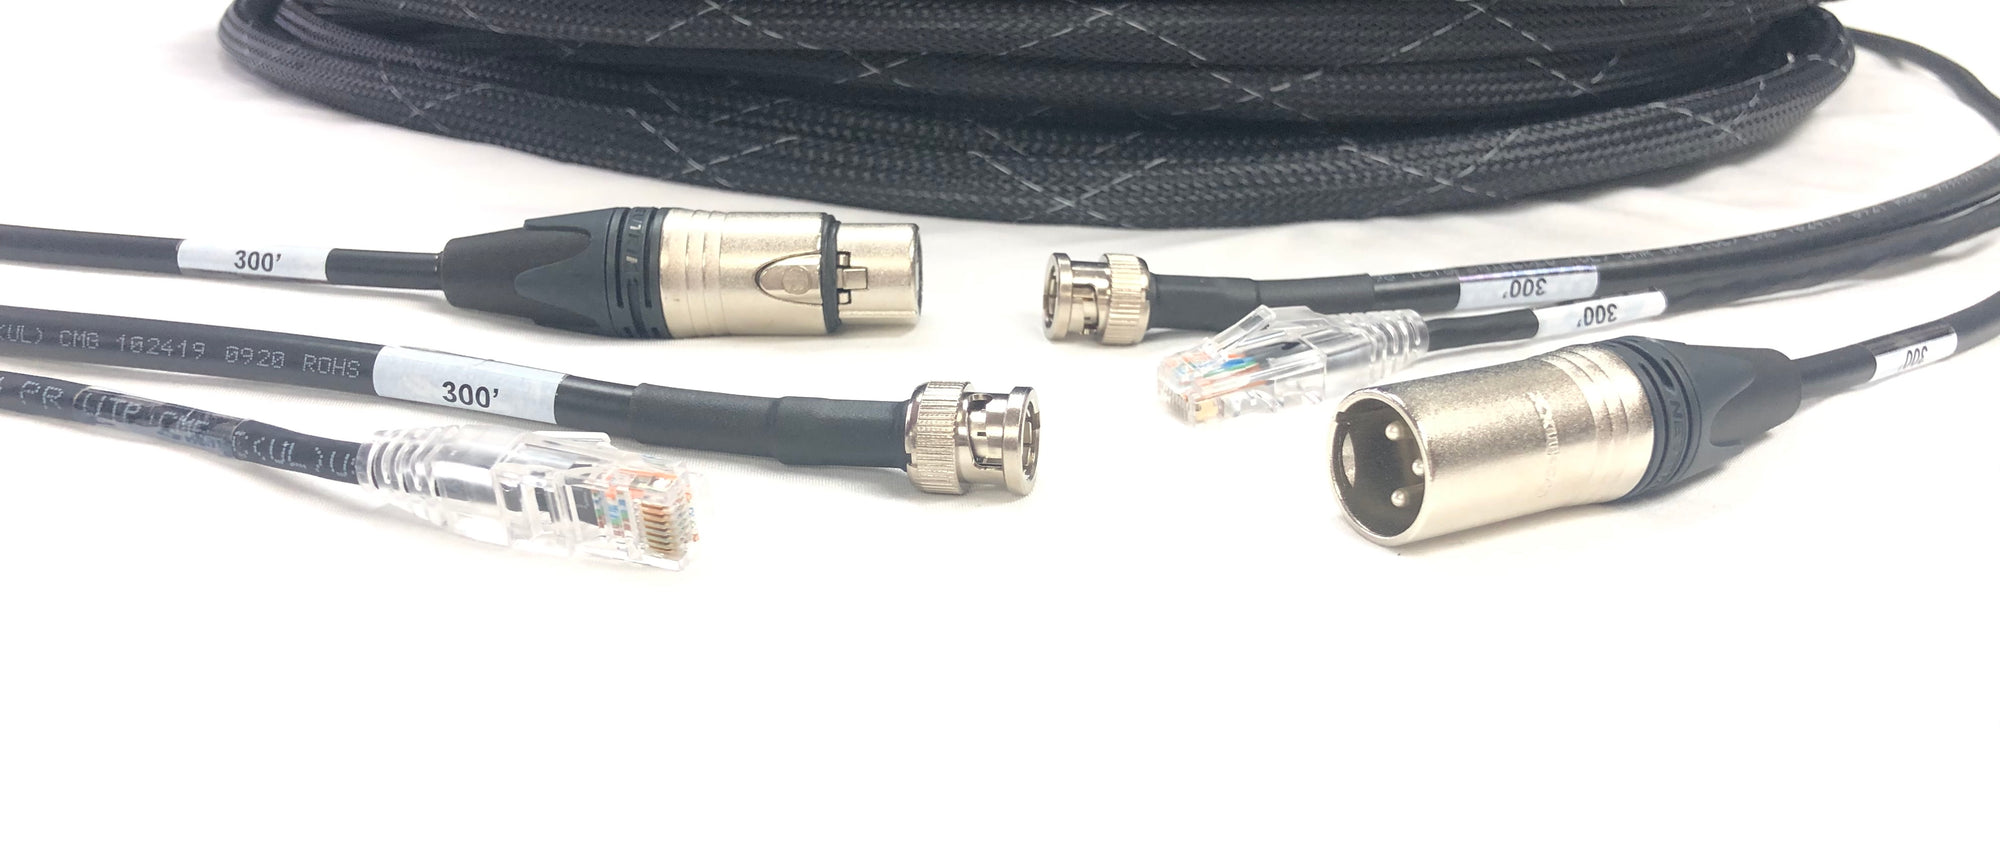 Snake Cable HD-SDI BNC, XLR, CAT5E all in one Jacket